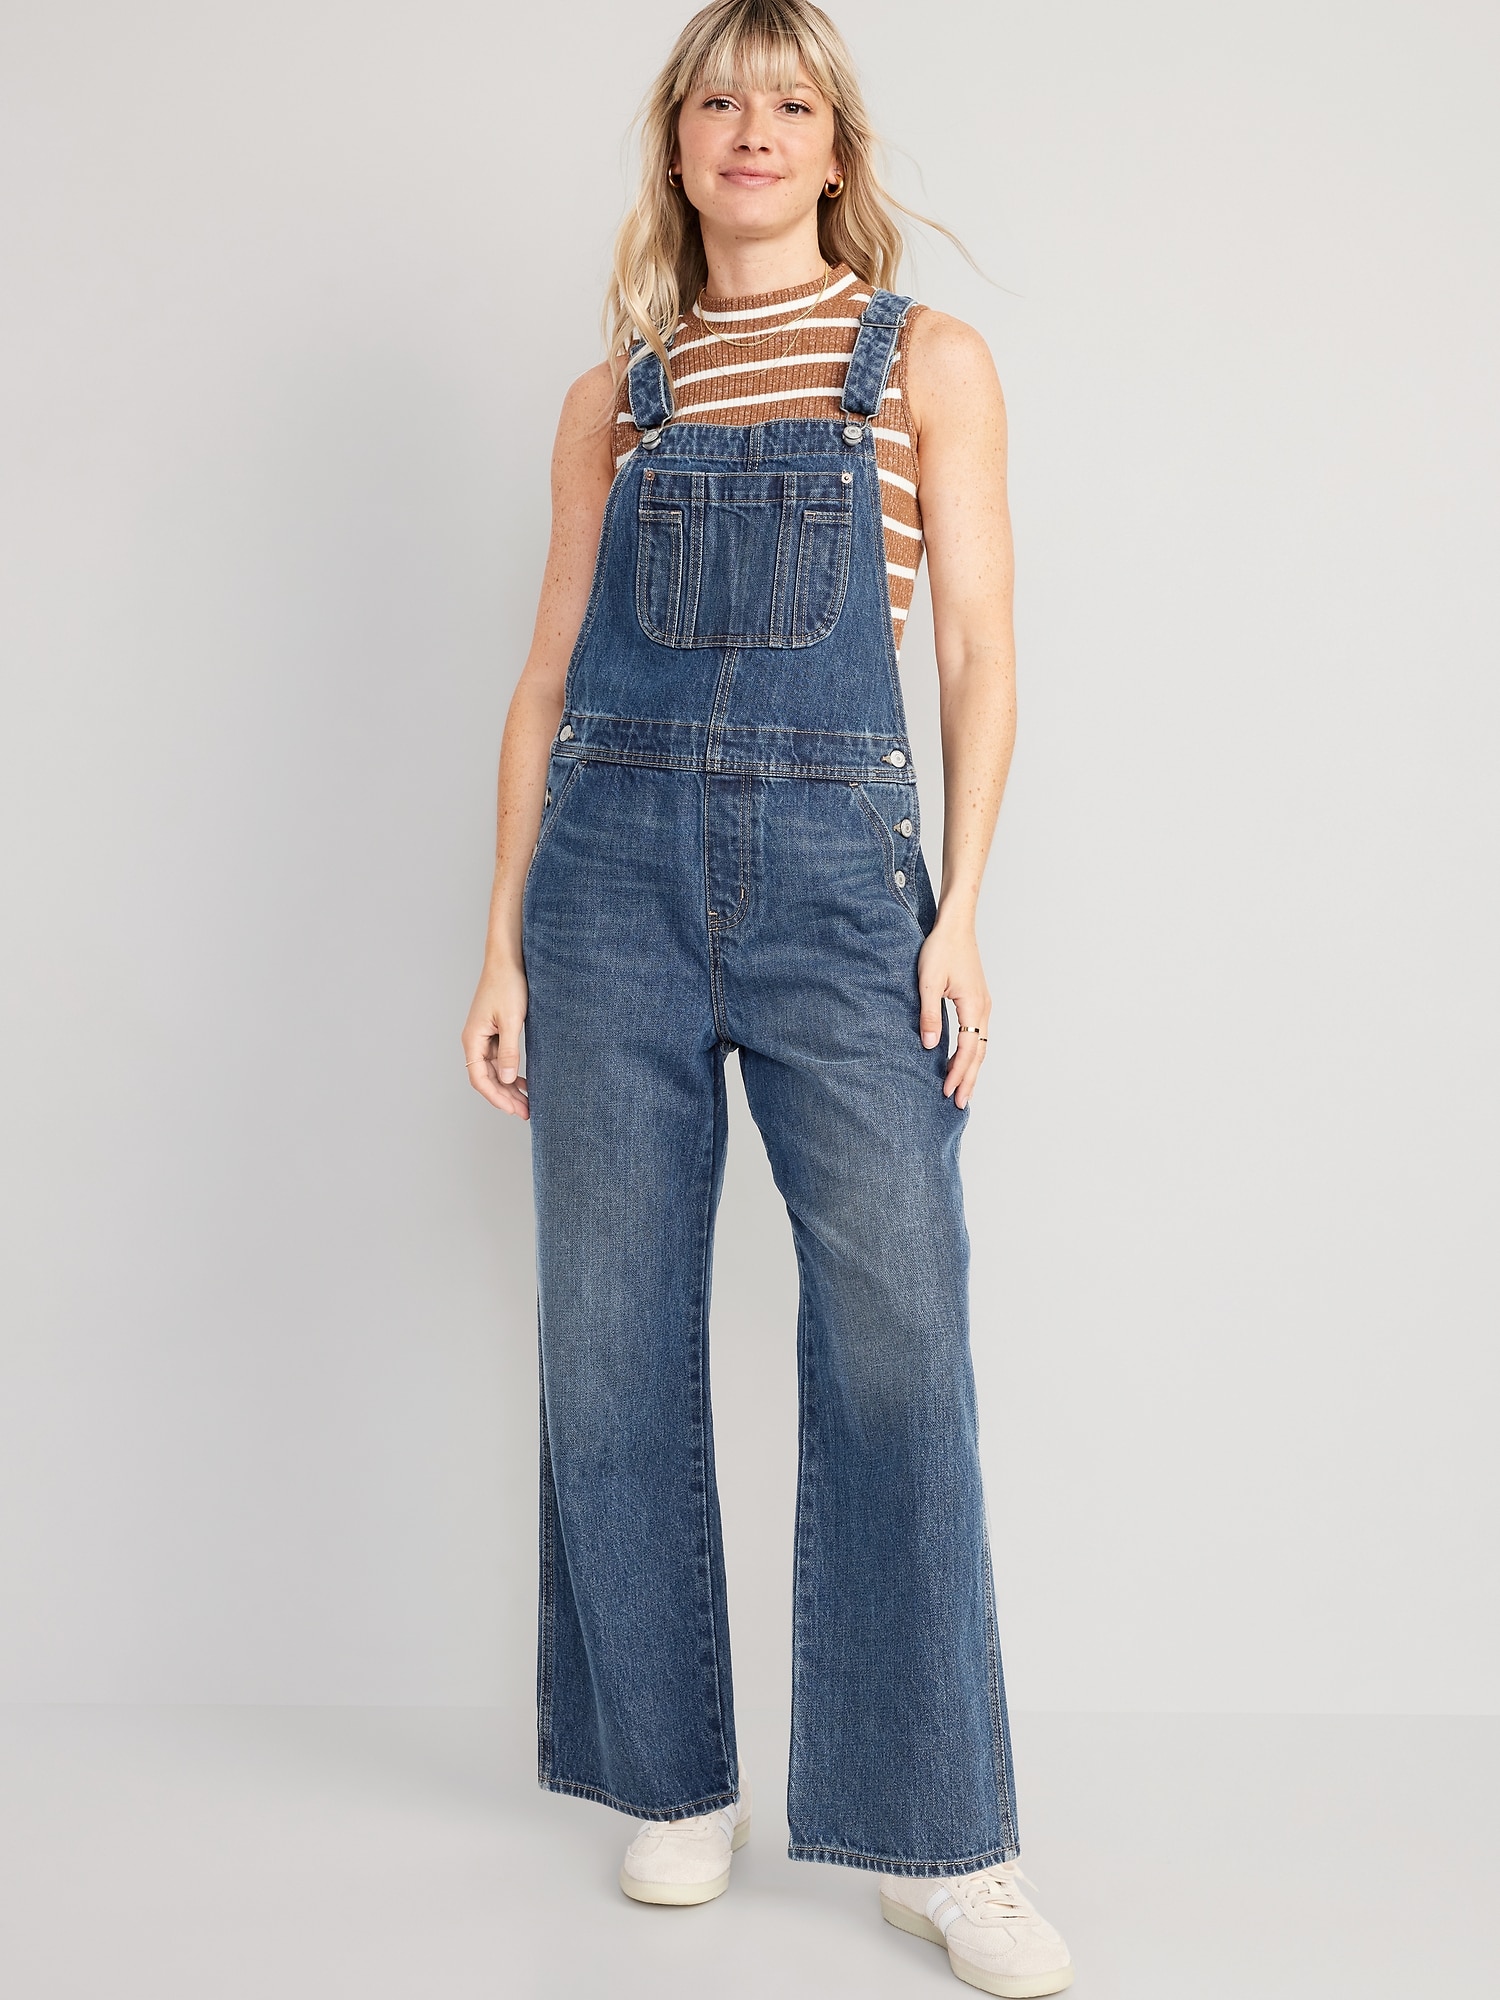 Oldnavy Baggy Wide-Leg Non-Stretch Jean Overalls for Women